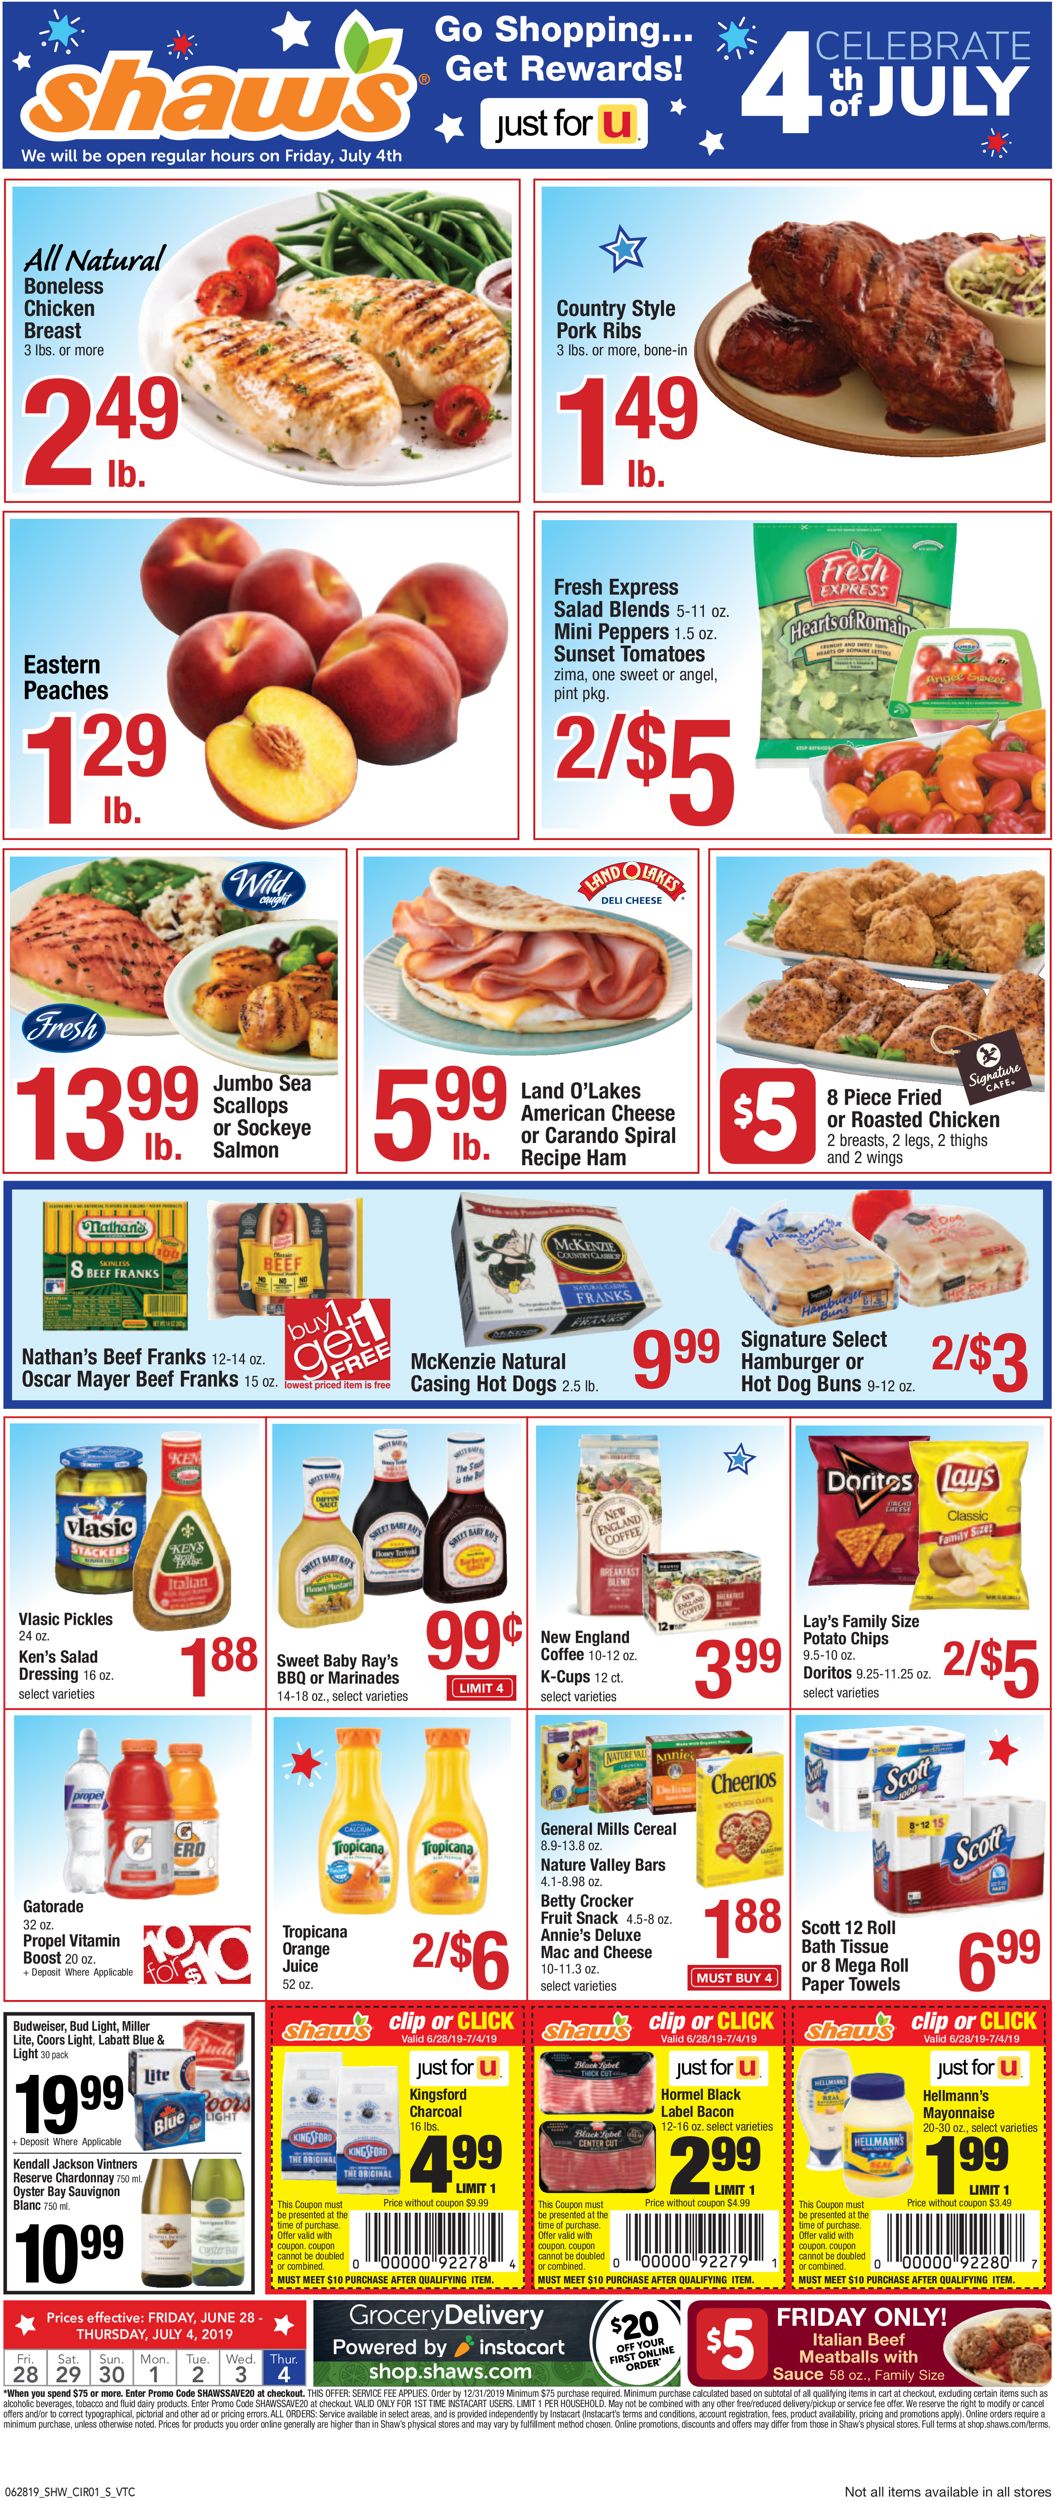 Shaw’s Current weekly ad 06/28 - 07/04/2019 [3] - frequent-ads.com